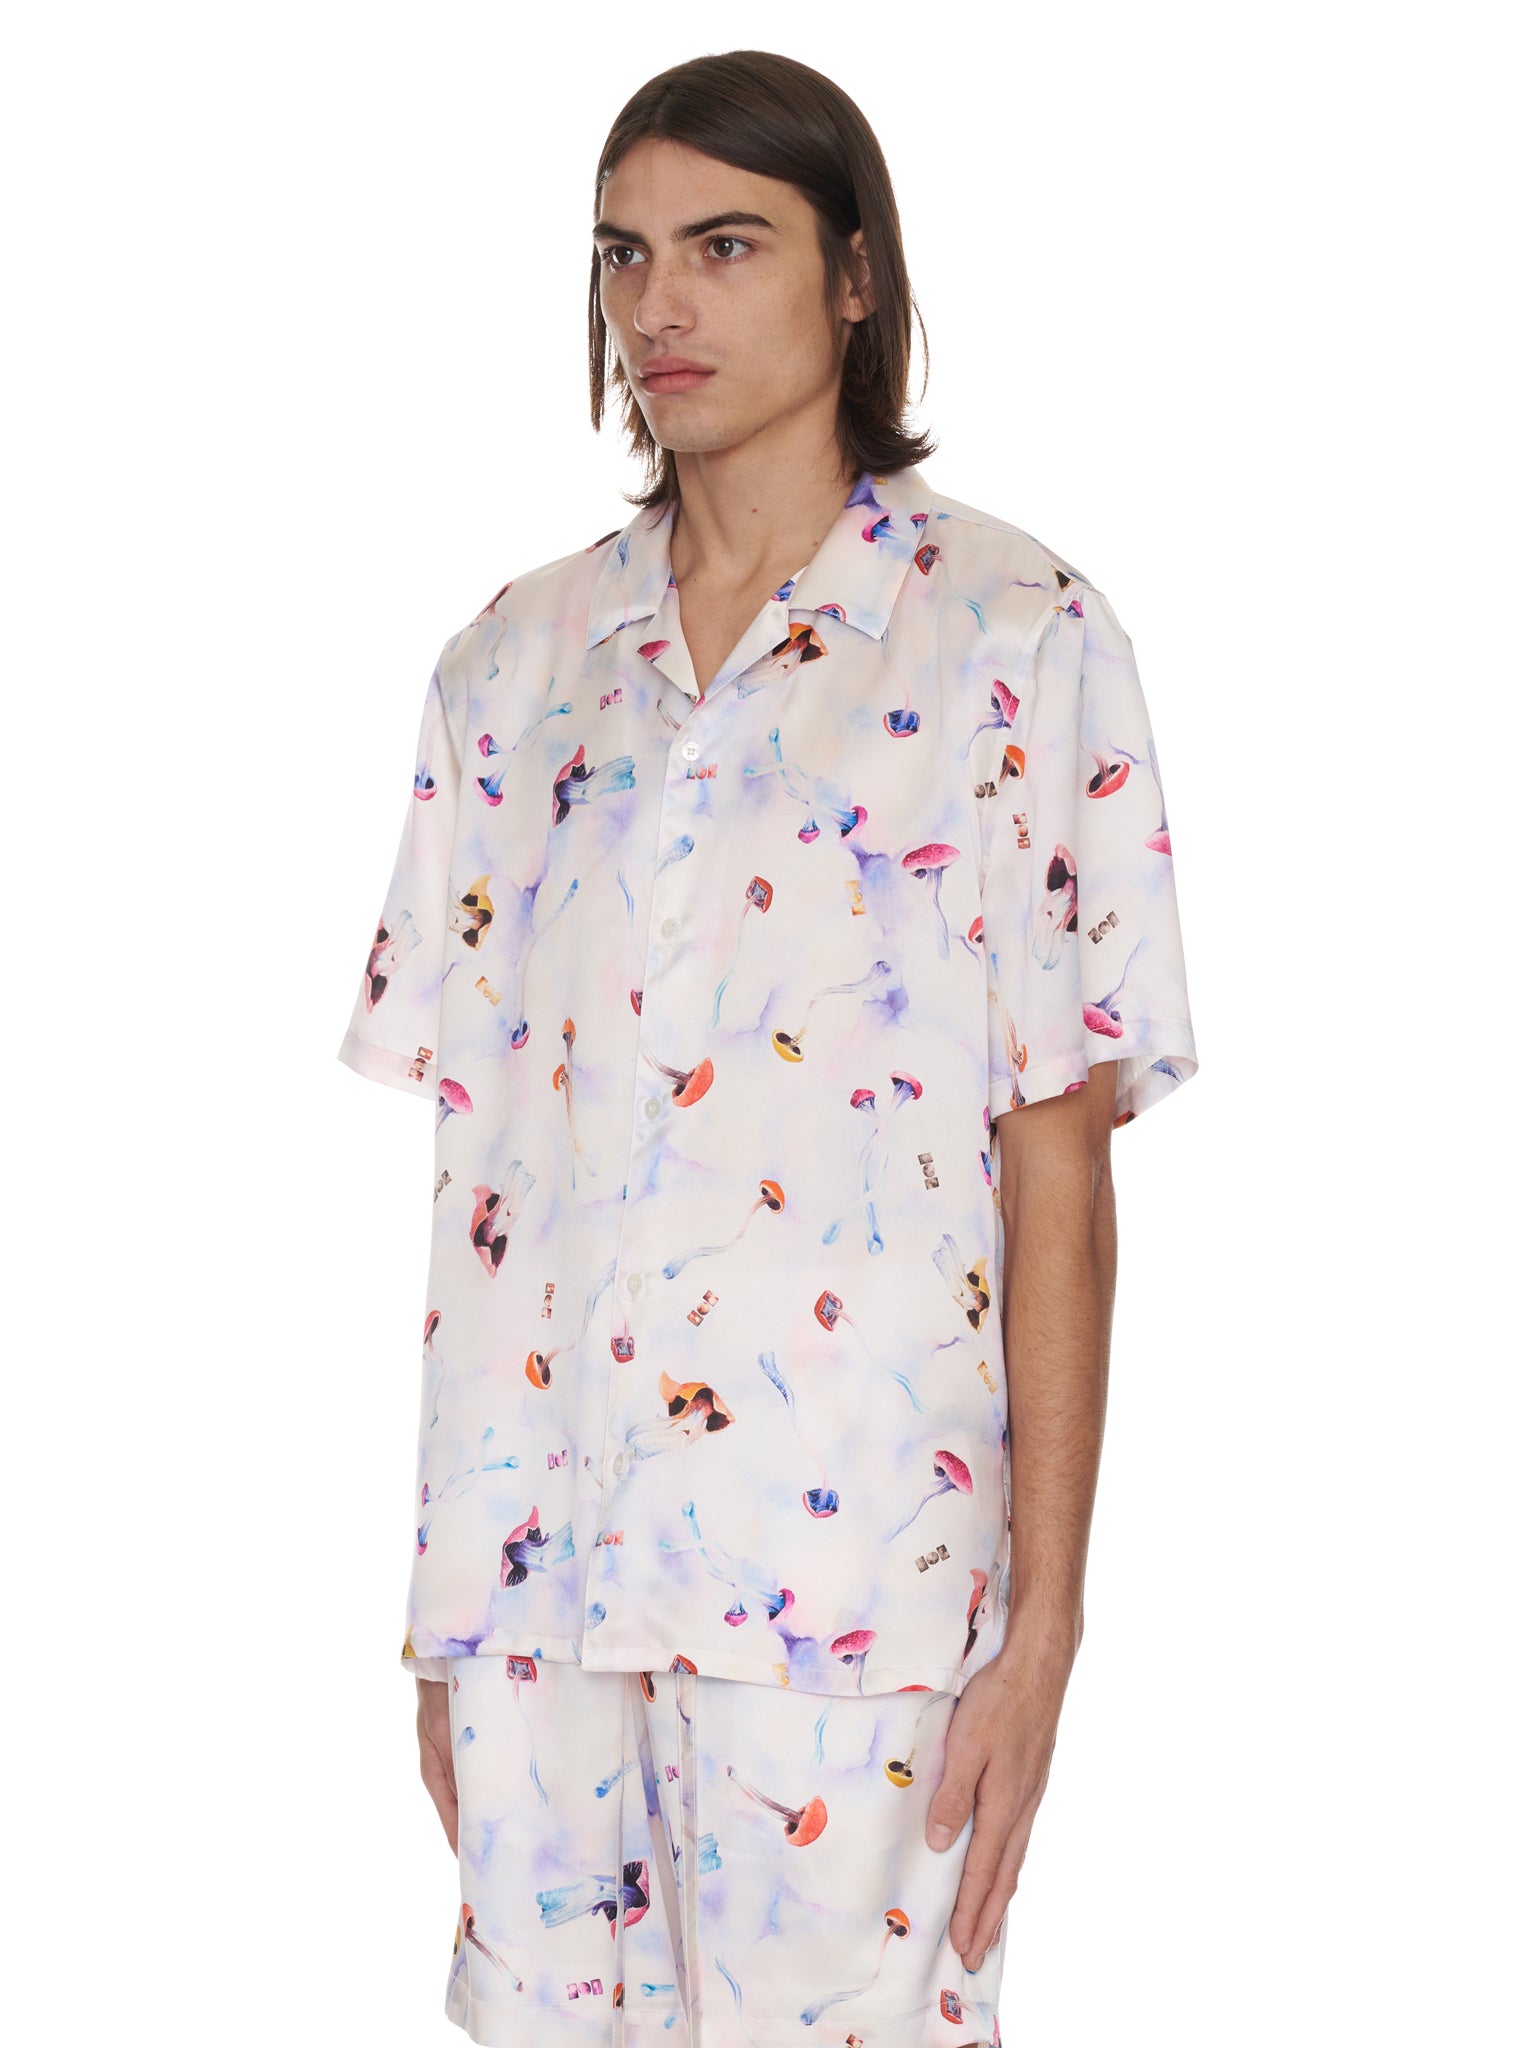 S/S Psychedelic Shirt